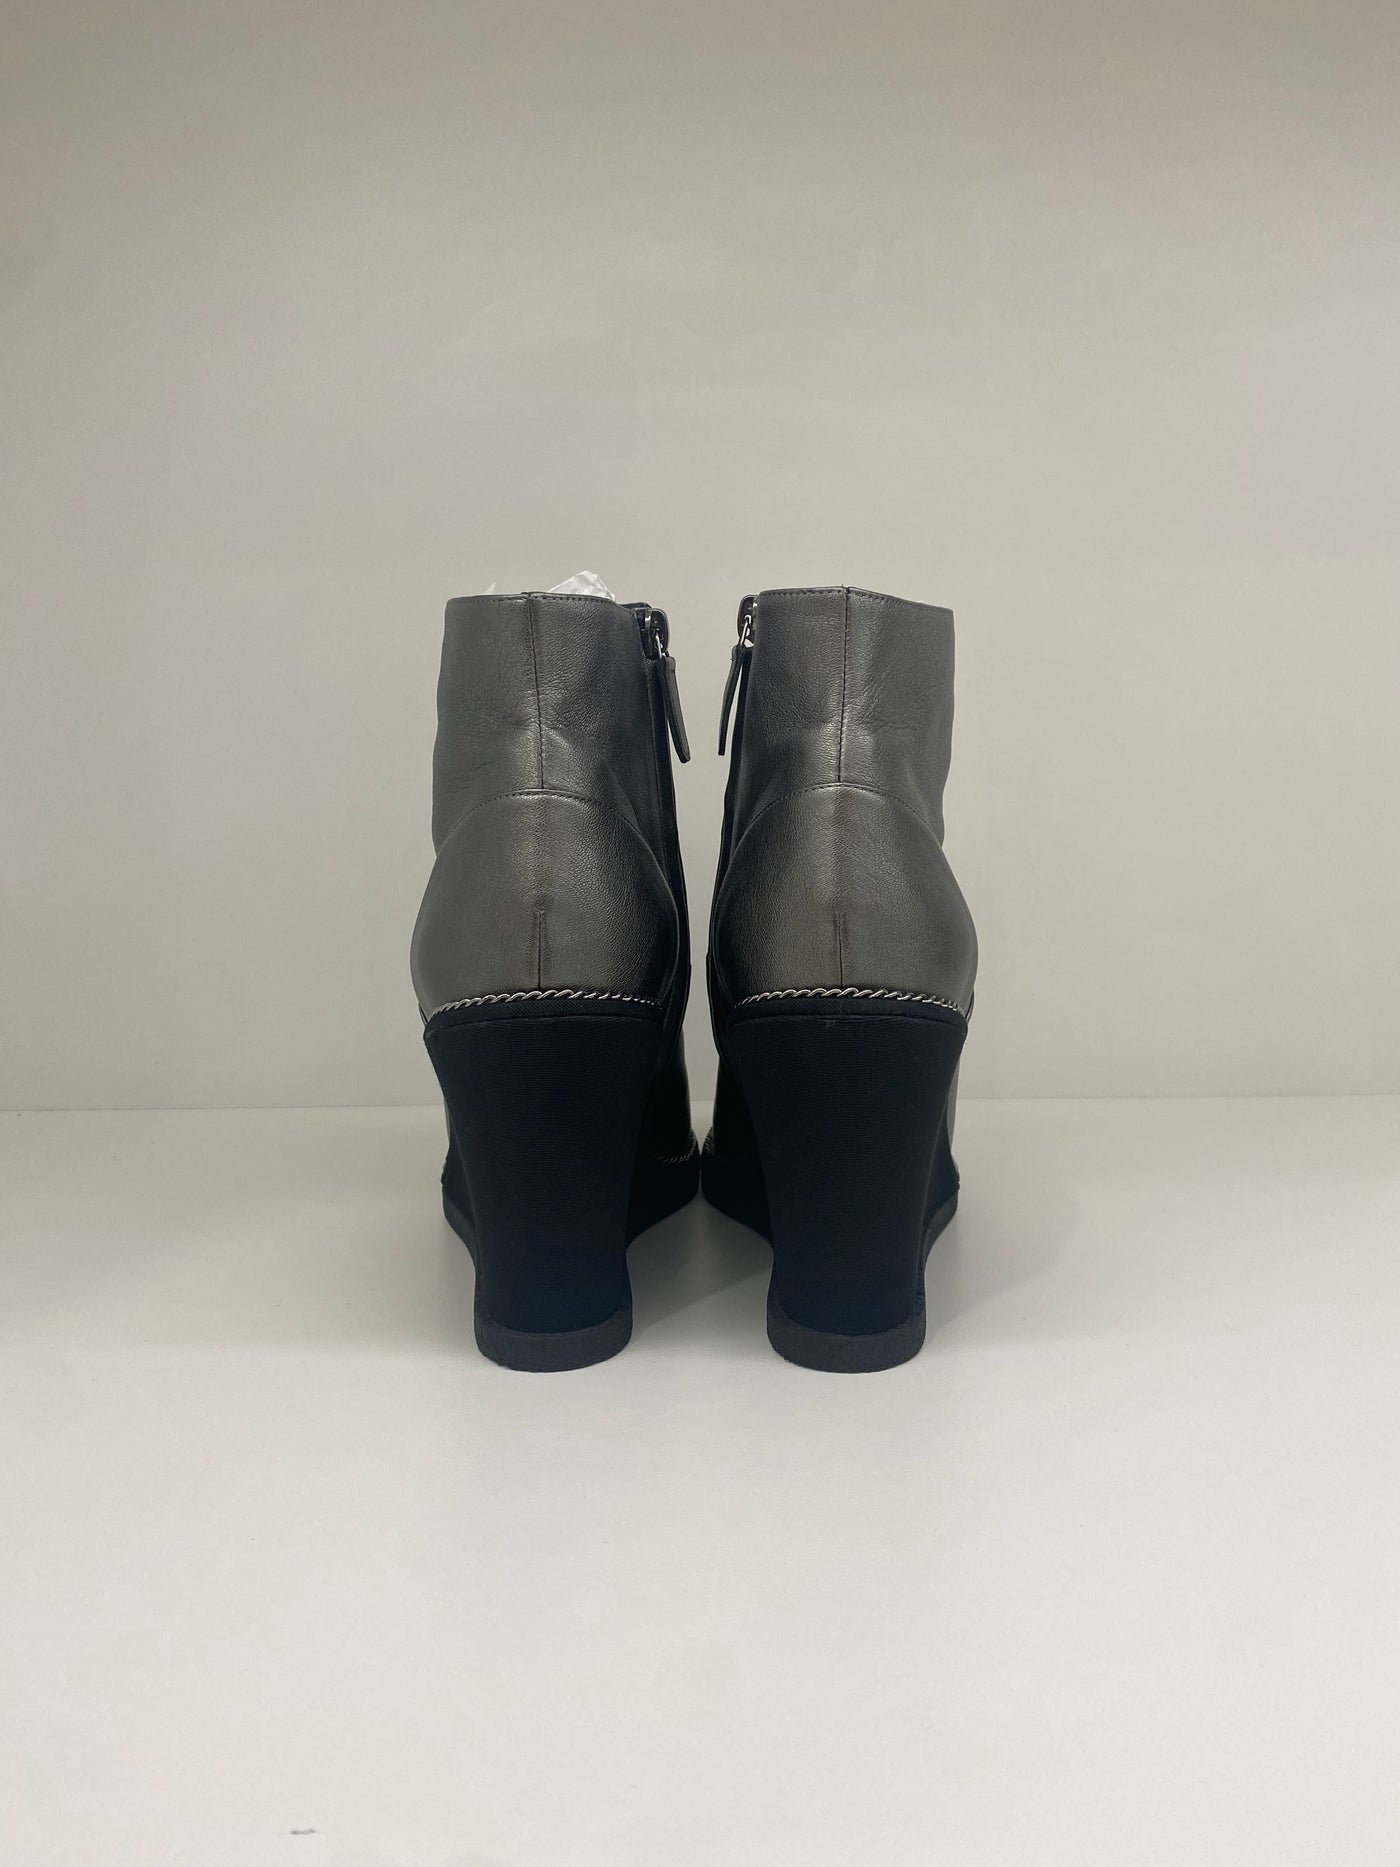 Chanel Wedge Boots size 40